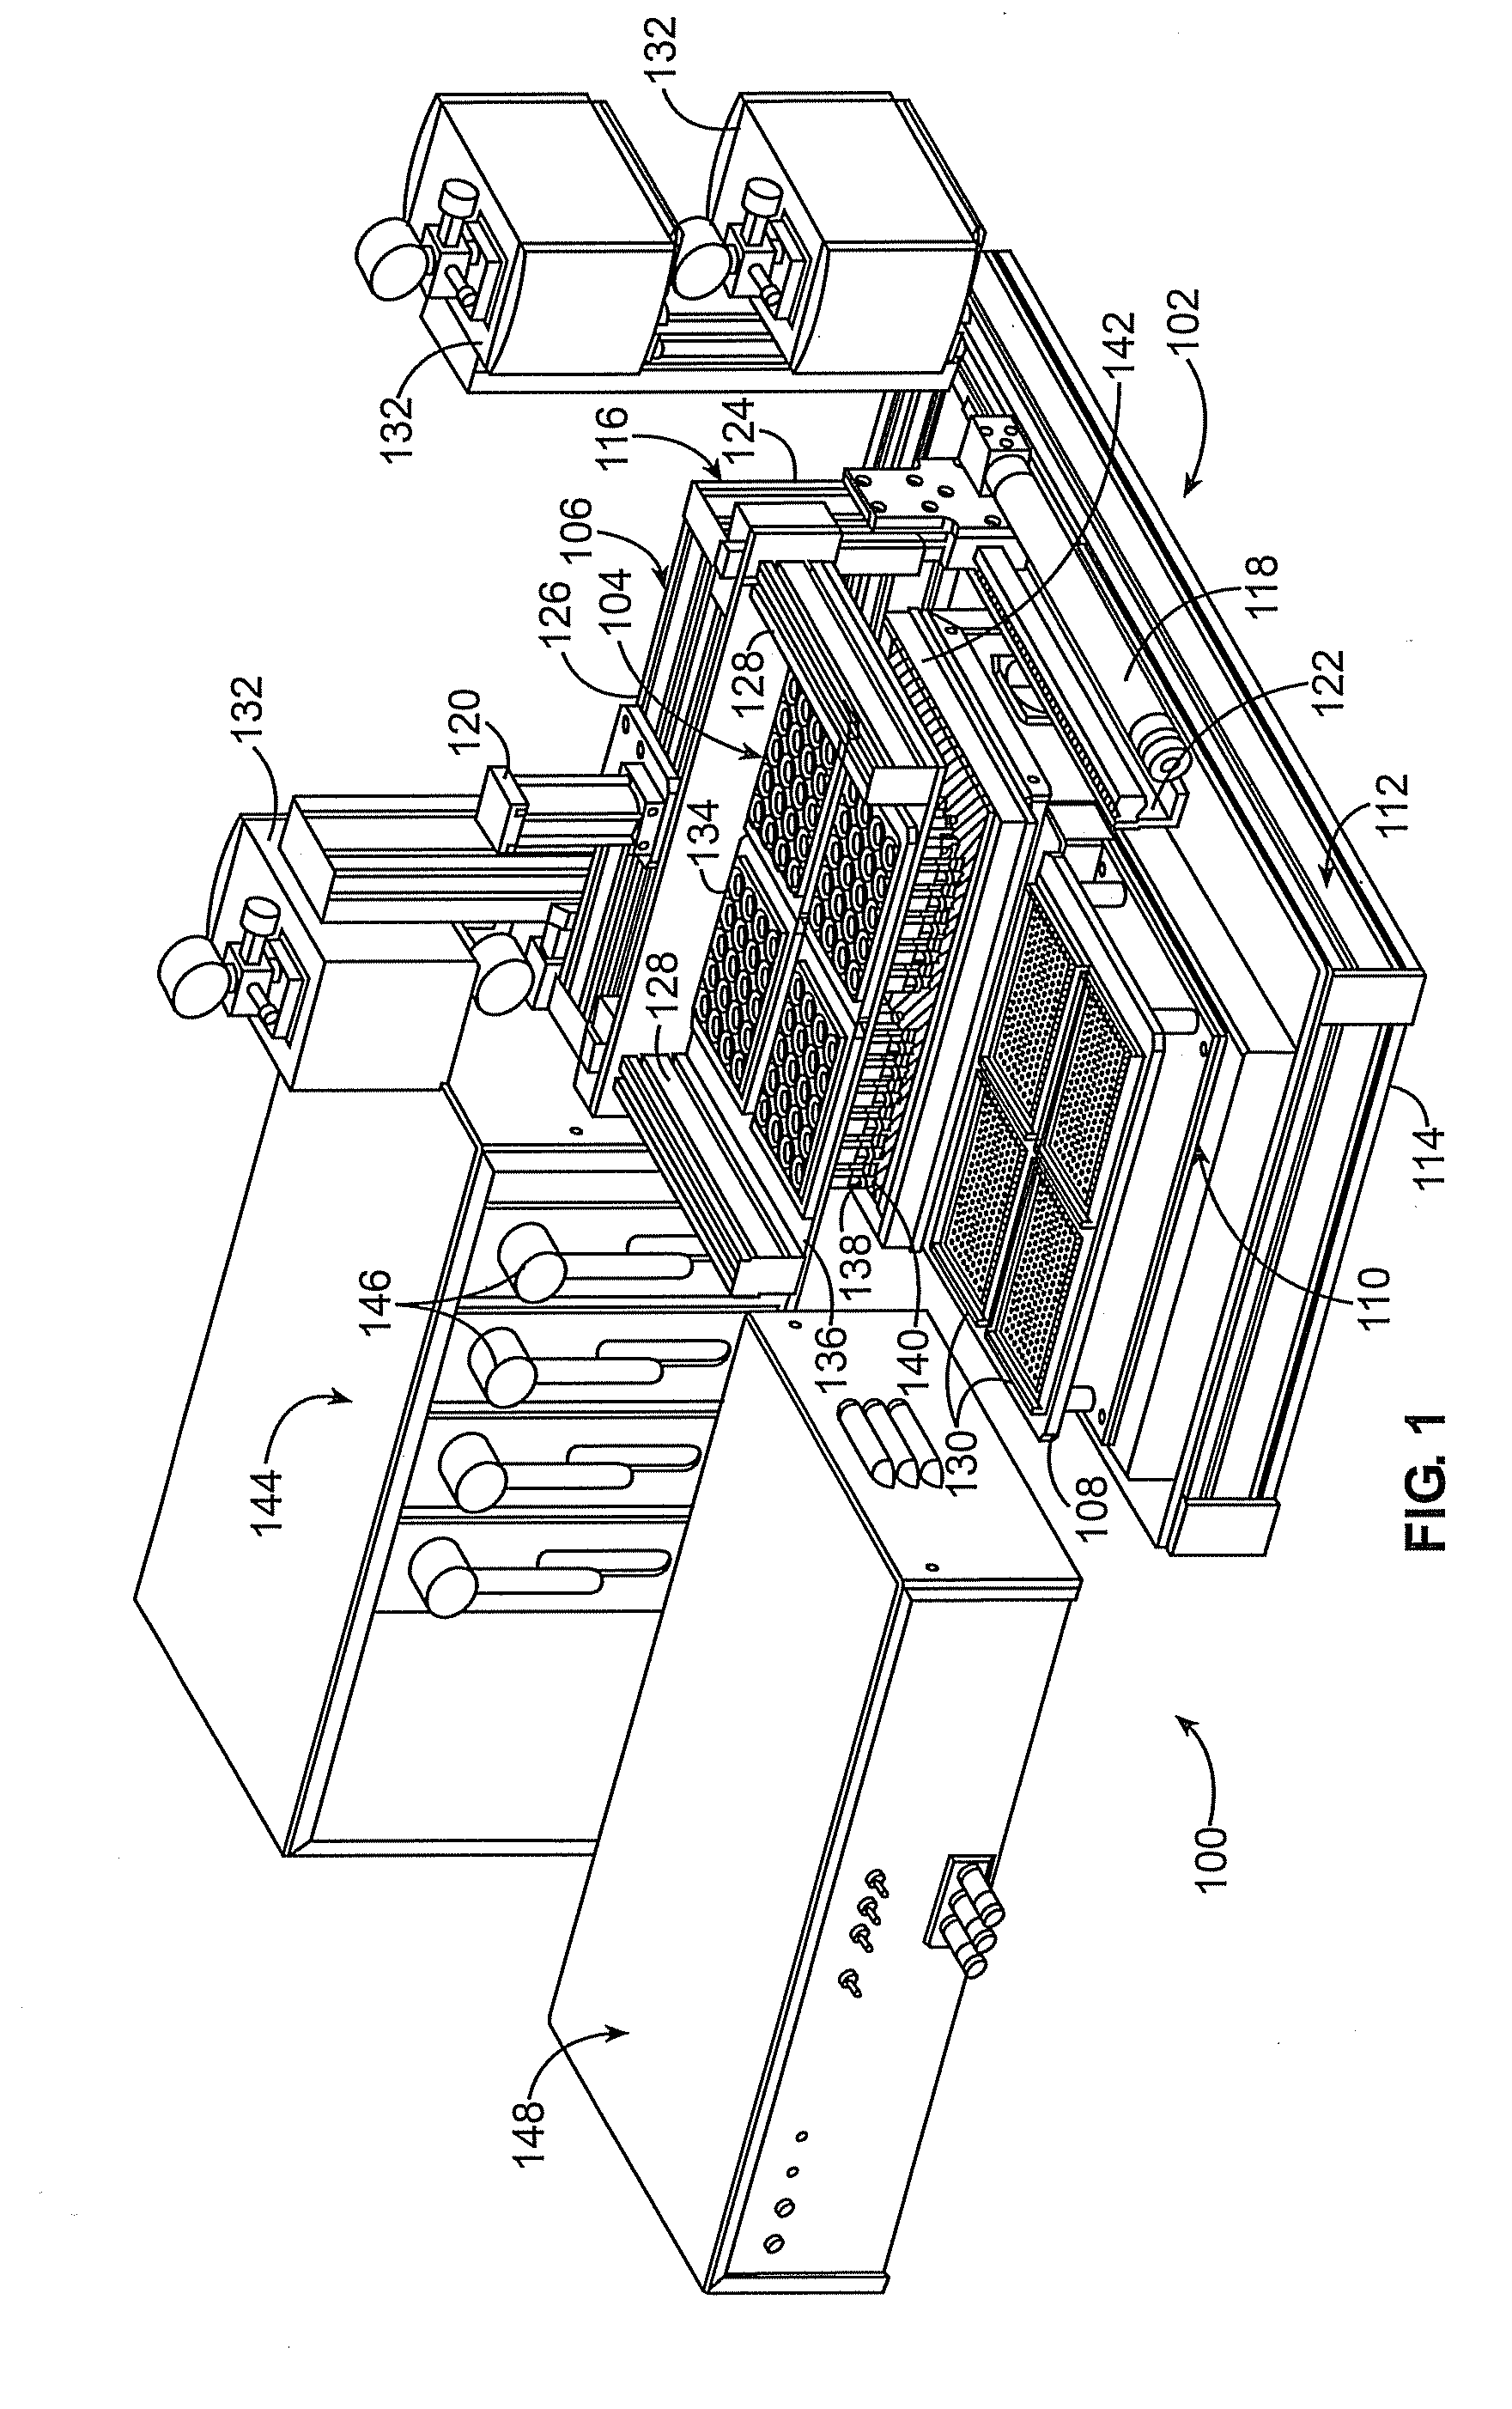 Scrub Testing Devices and Methods